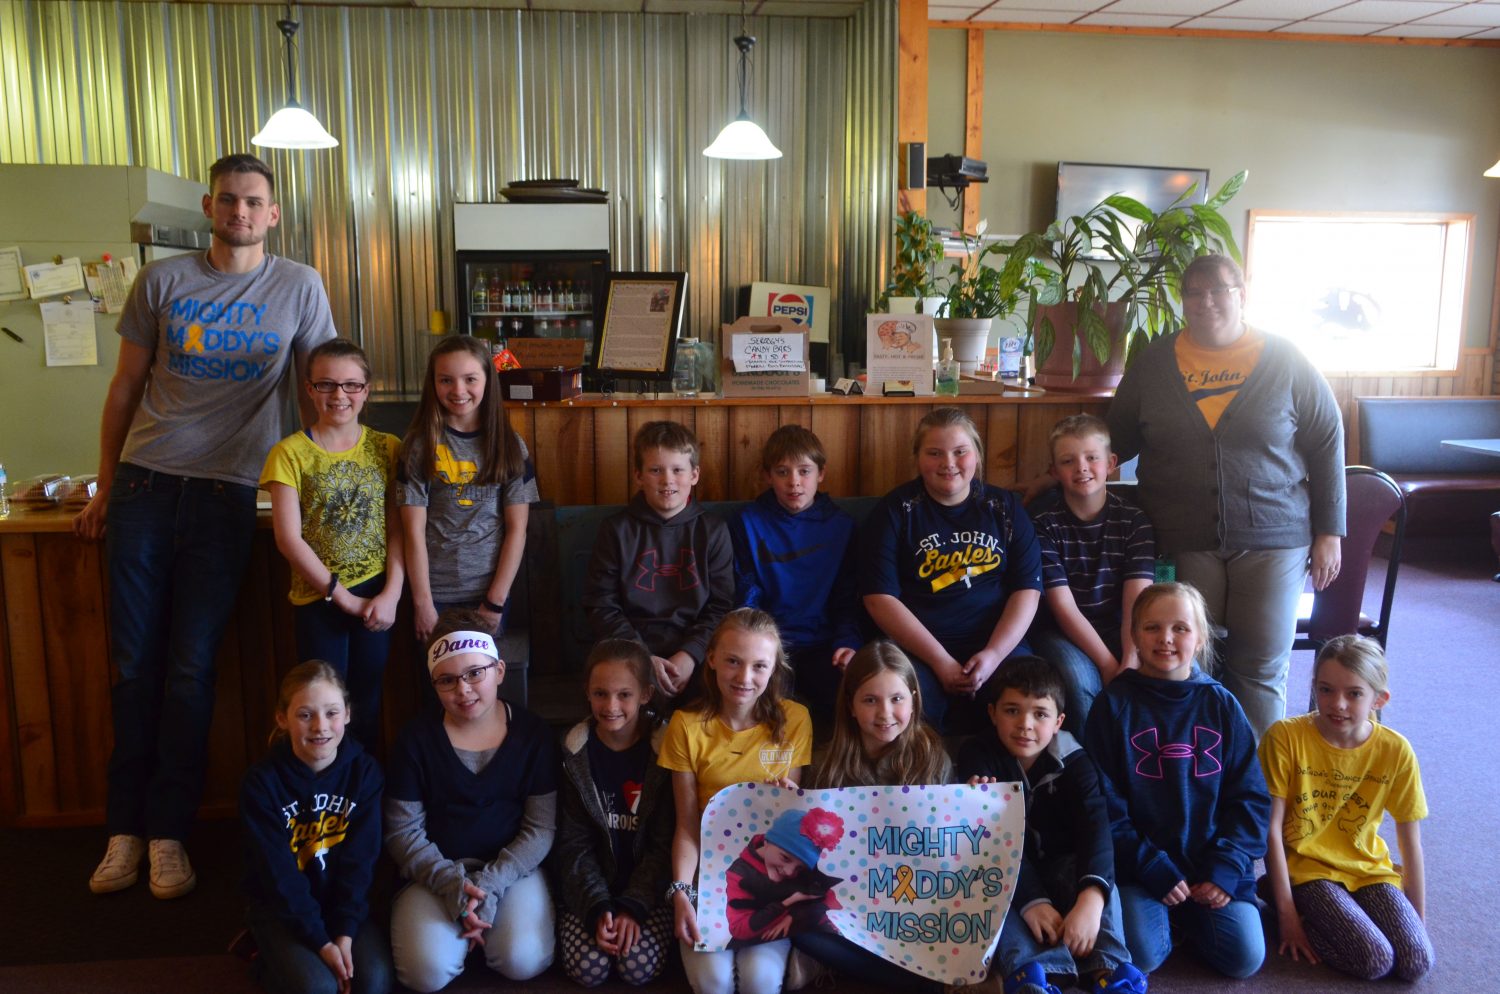 St. John fourth and fifth graders donate to Mighty Maddy’s Mission